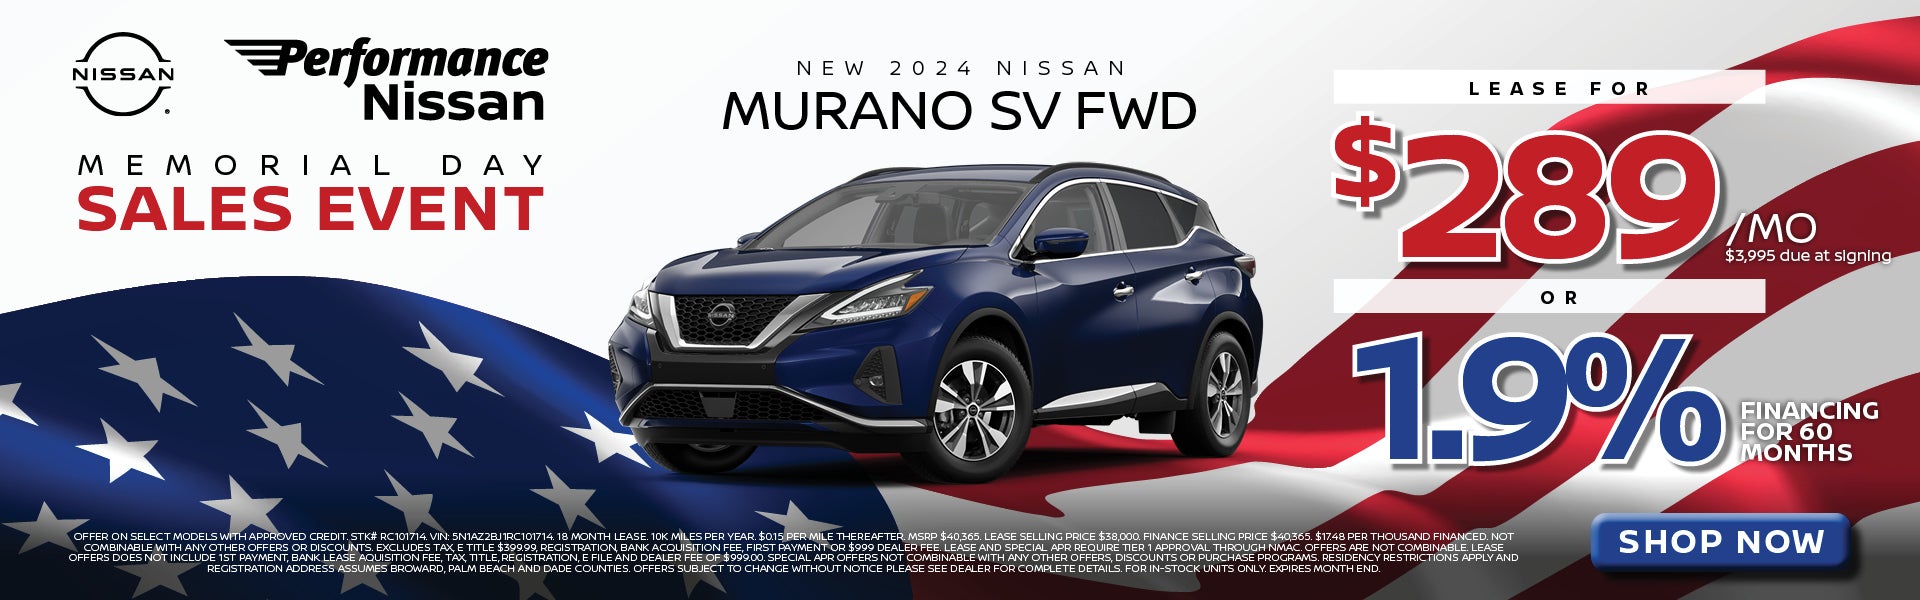 Memorial Day Sales Event 2024 Nissan Murano